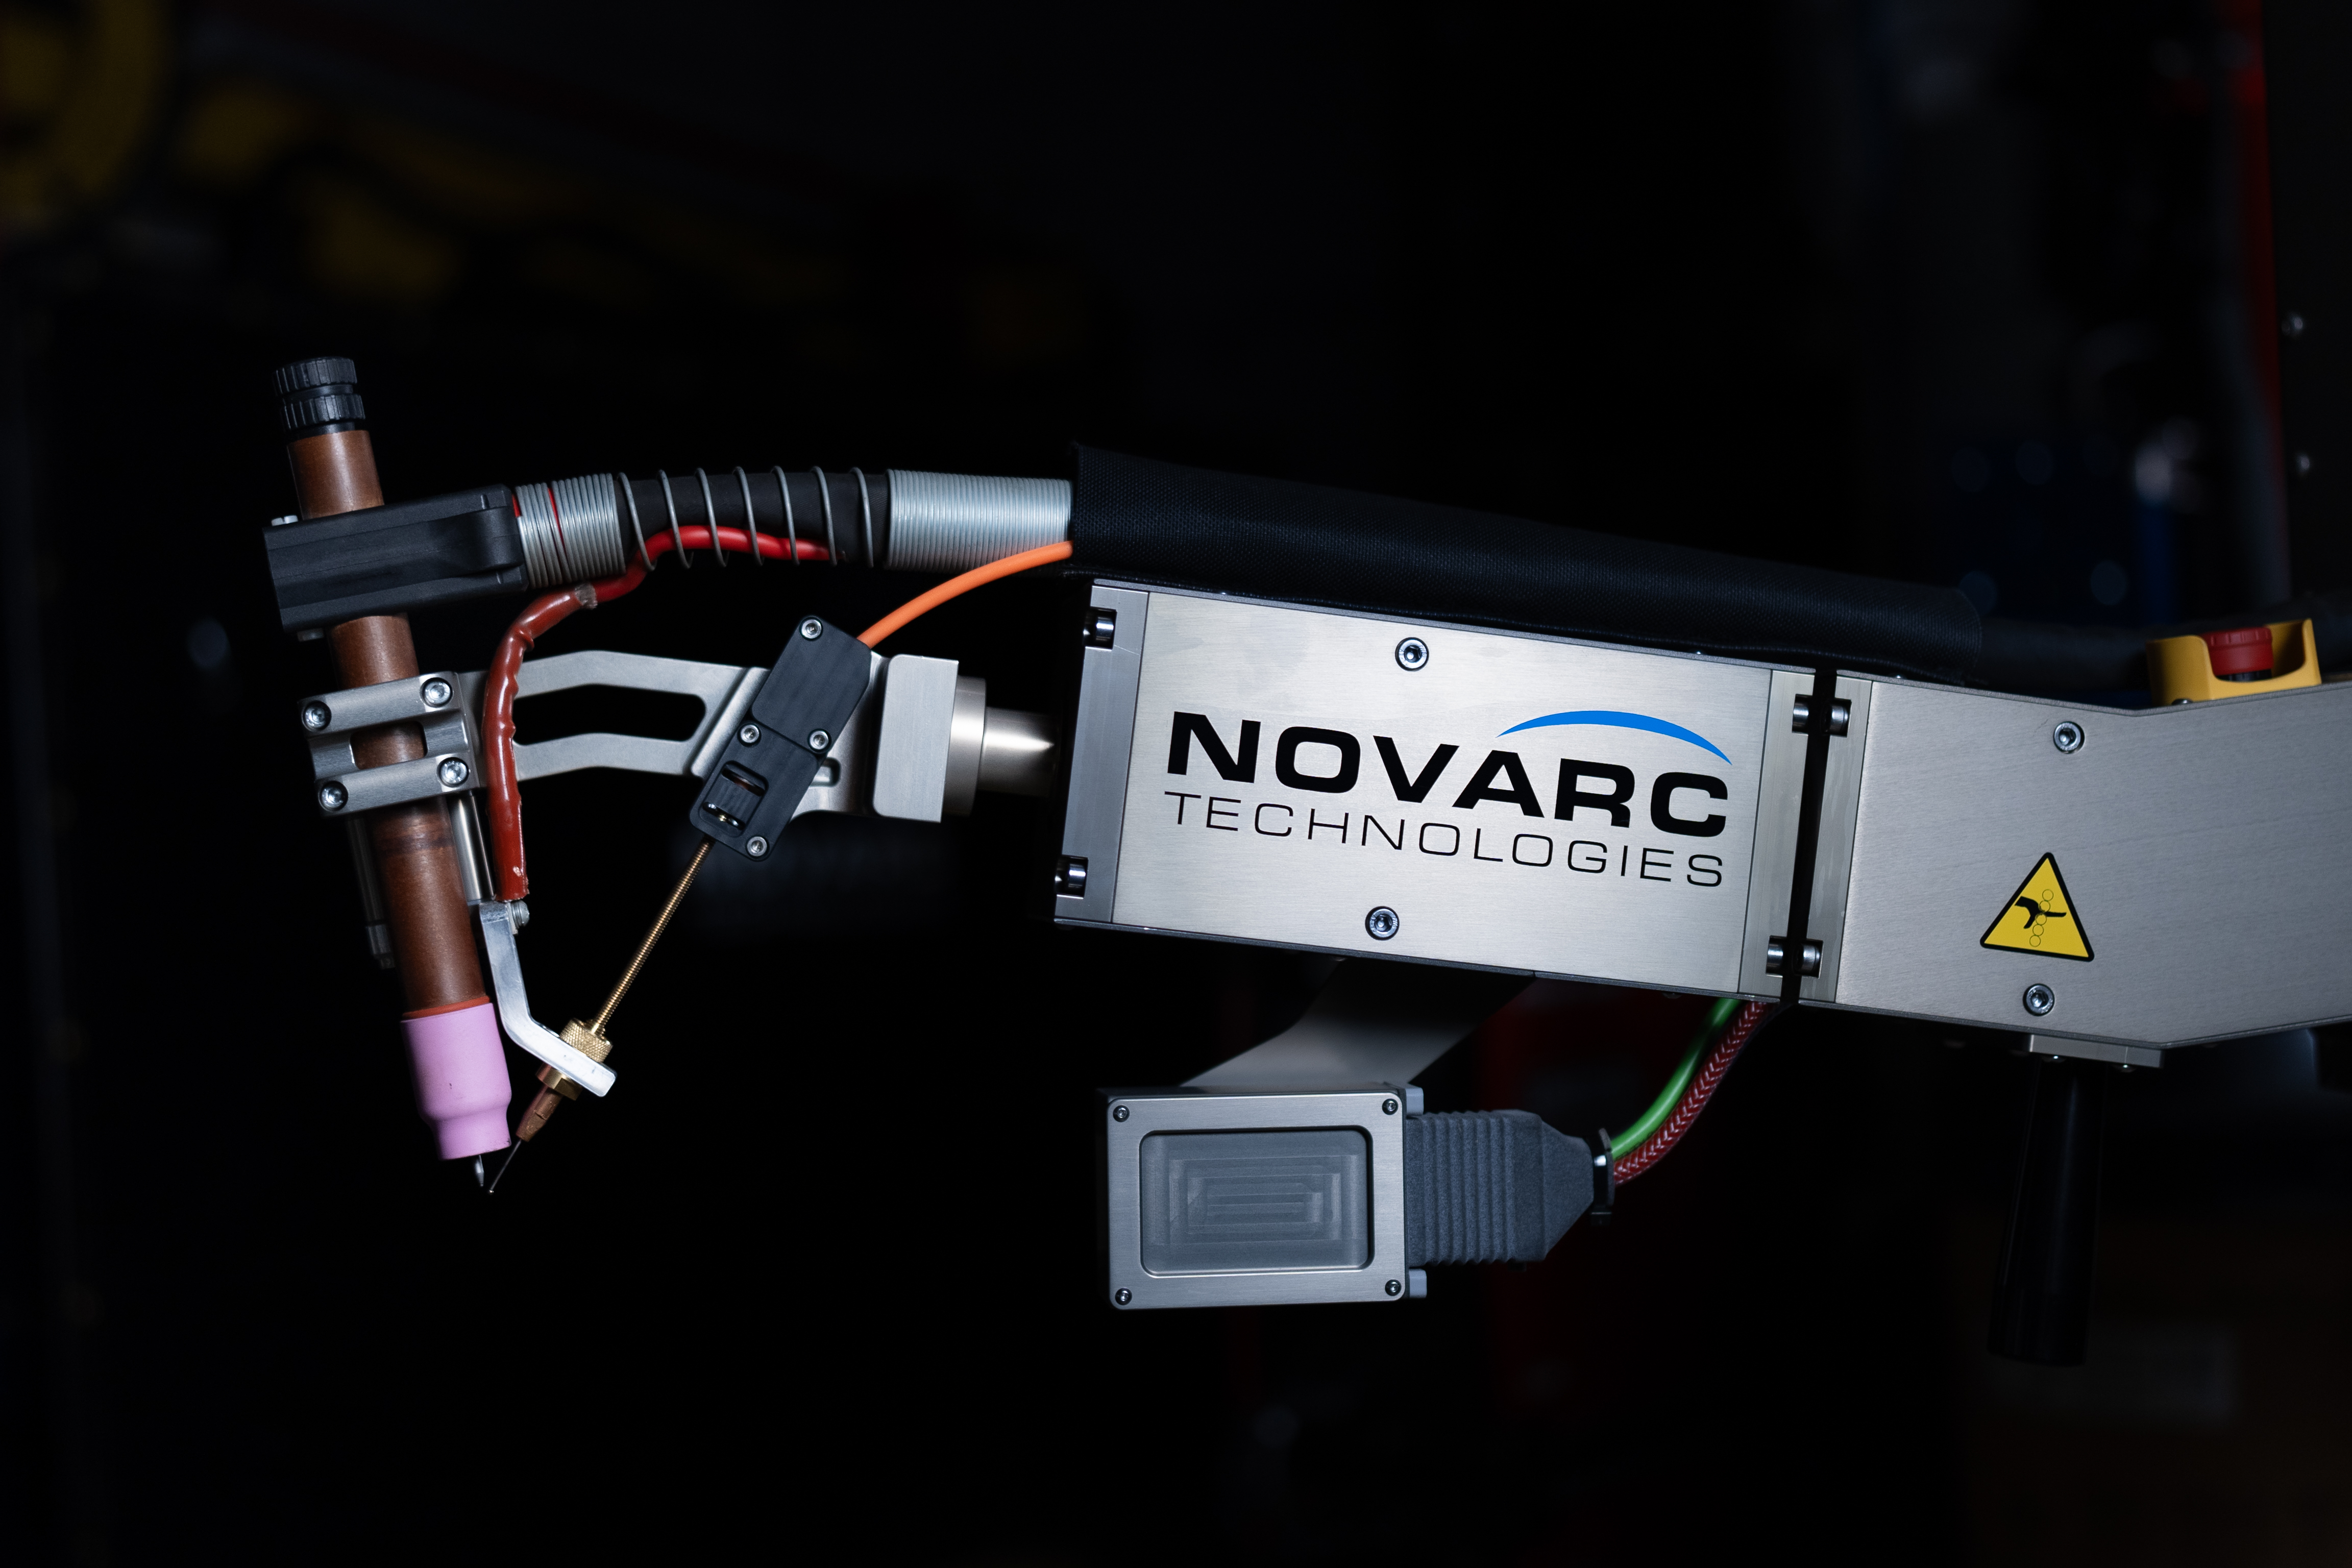 Novarc's TIPTIG welding stystem enables faster, more precise welds, enhancing both efficiency and quality, with 2.6 faster weld deposition.